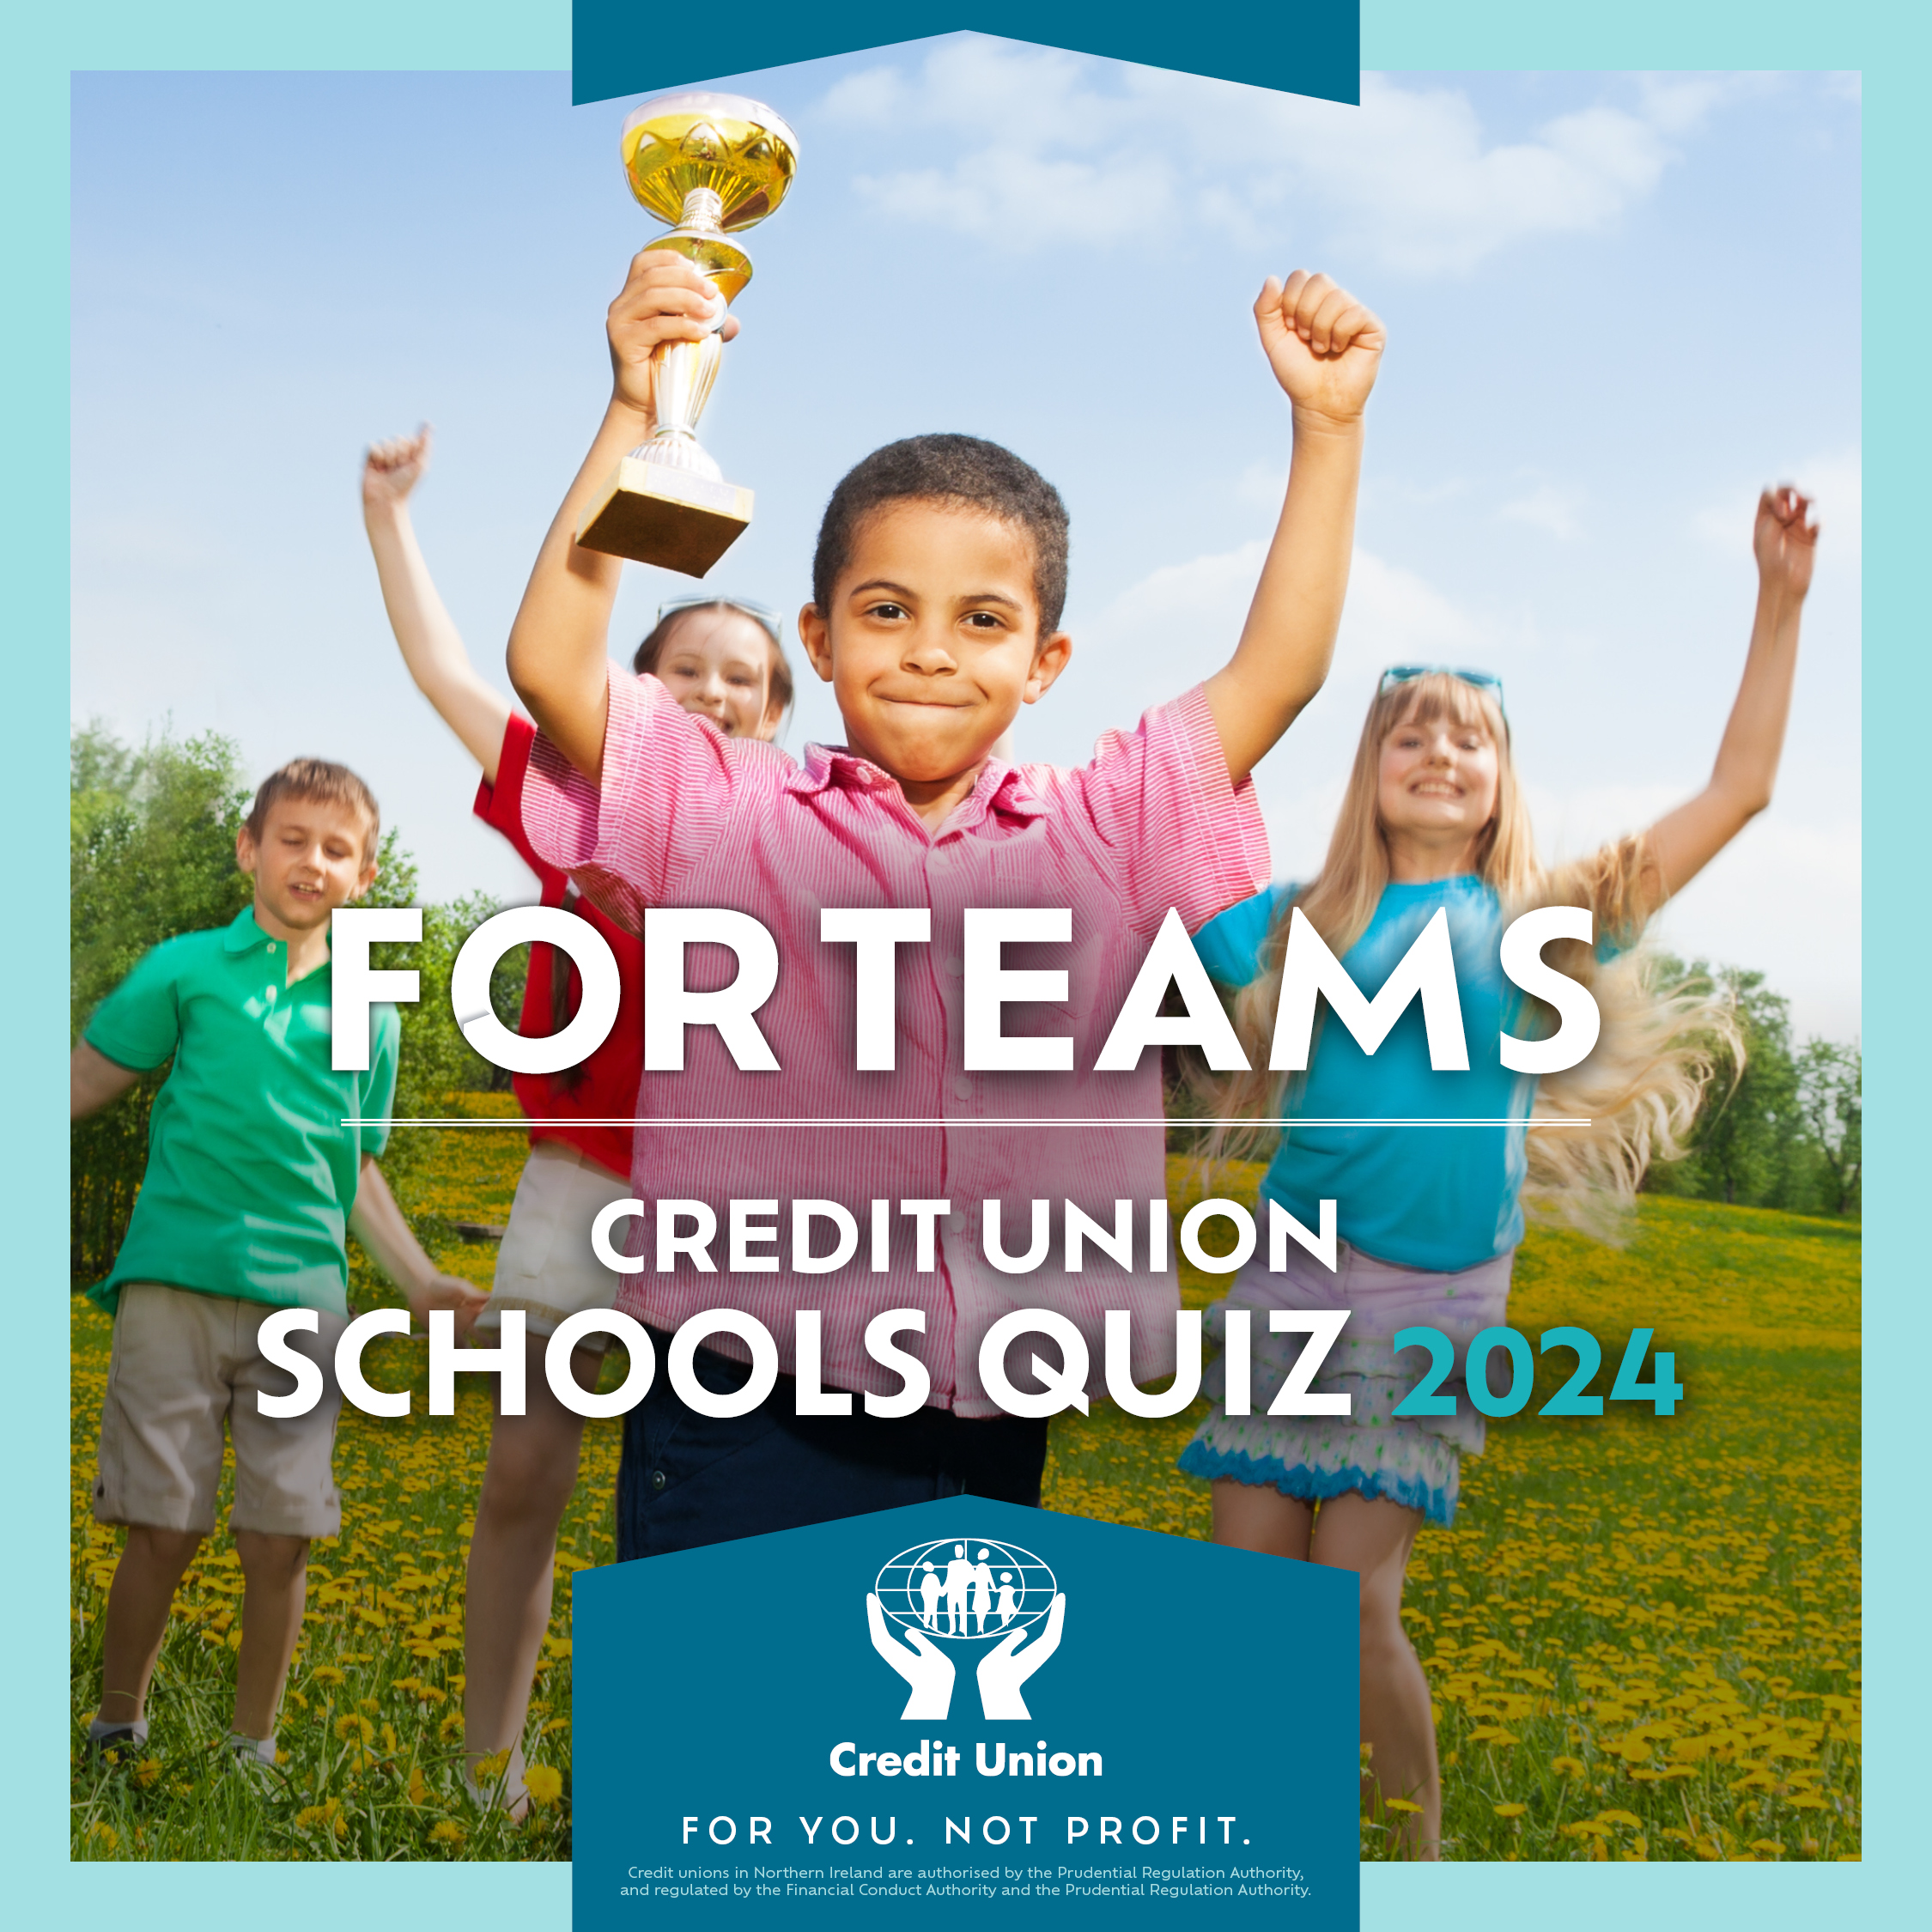 The 2024 Schools Quiz is back with Dungannon Credit Union!